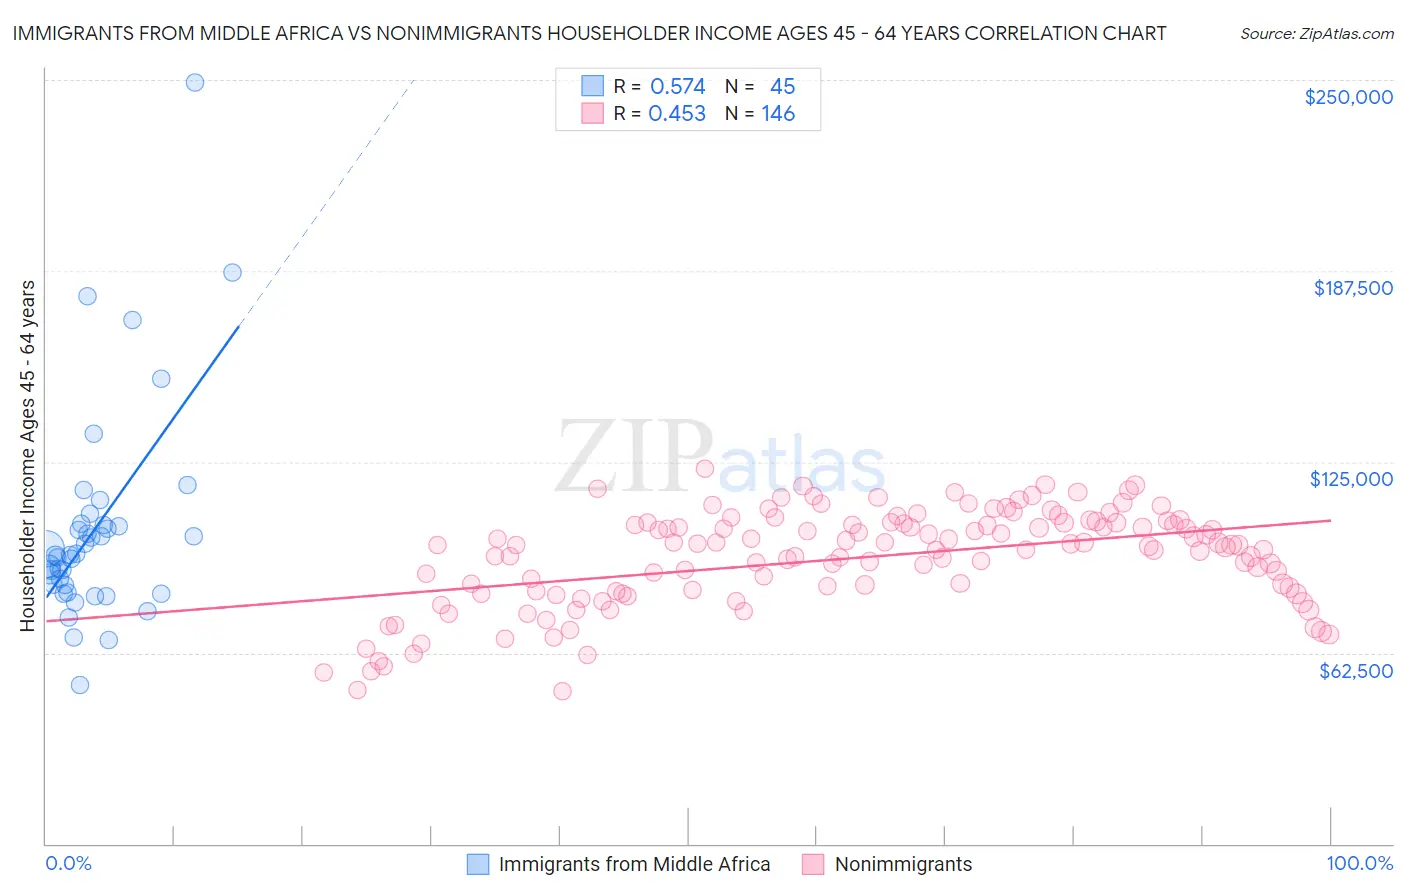 Immigrants from Middle Africa vs Nonimmigrants Householder Income Ages 45 - 64 years